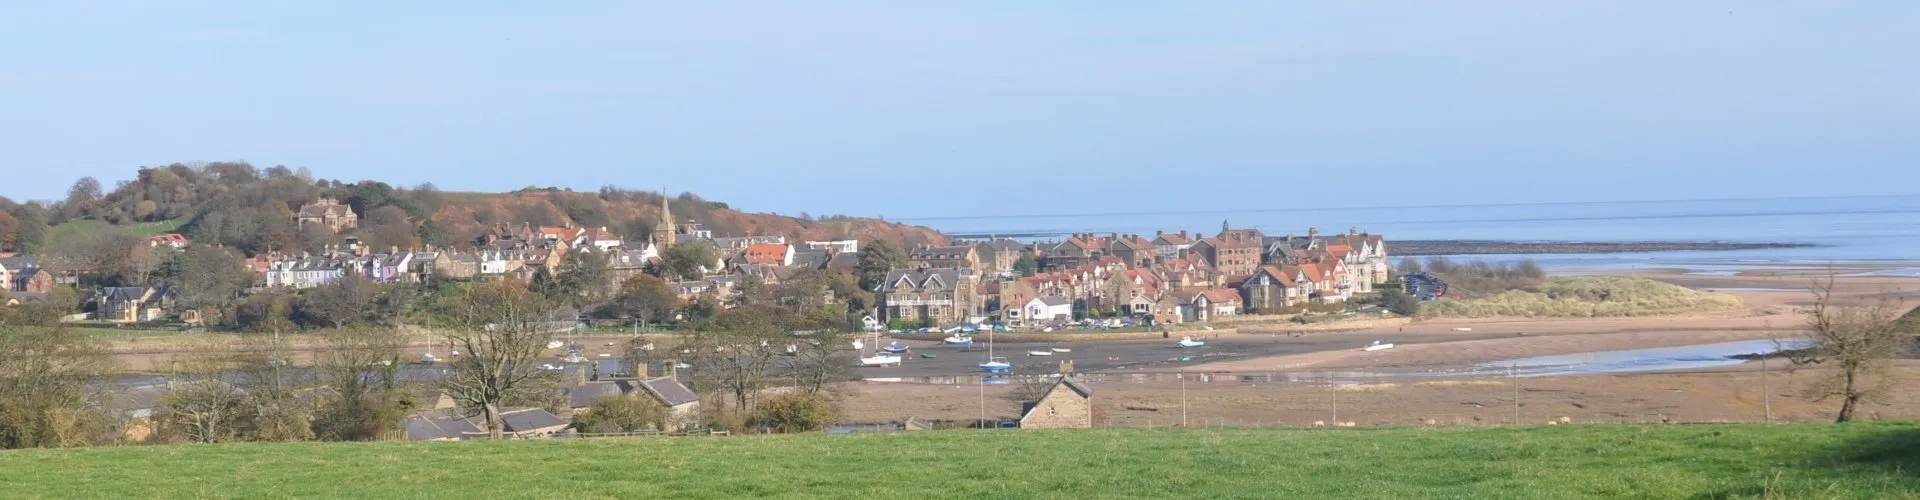 View of Alnmouth village and the estuary at low tide